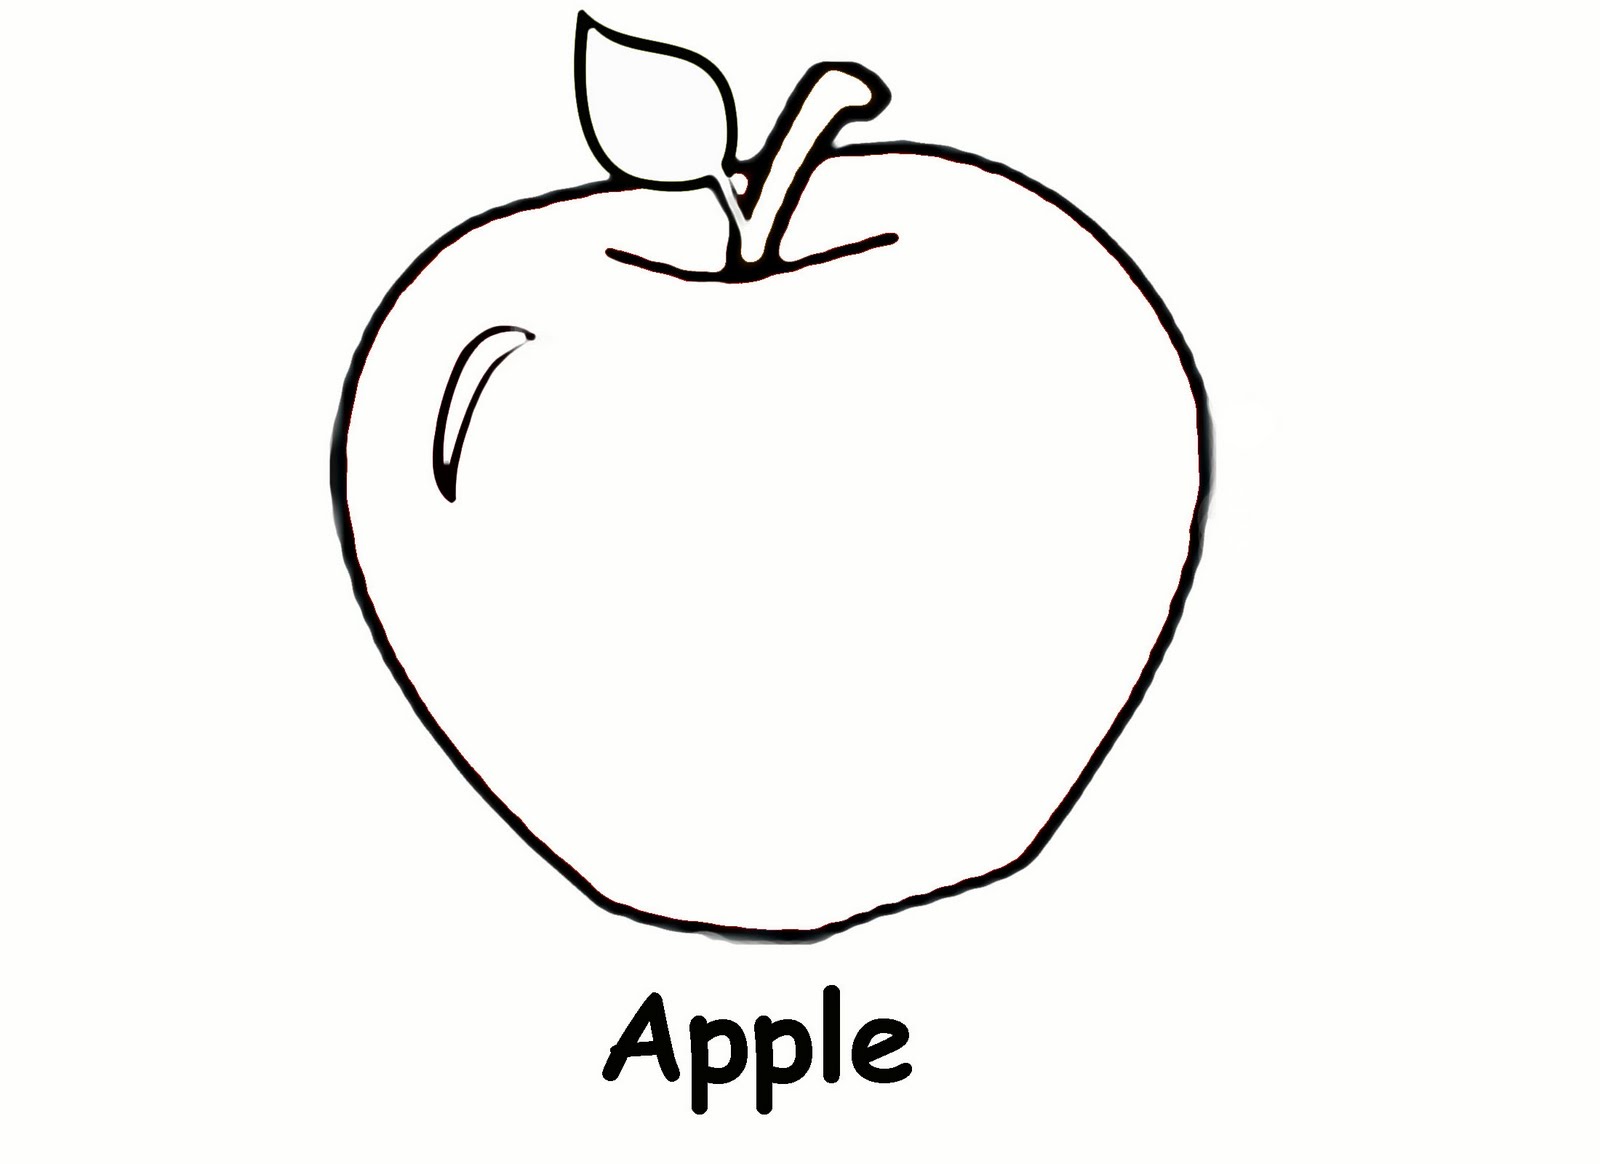 Apple Fruit Coloring Pages - Fruits Coloring pages of PagesToColor ...